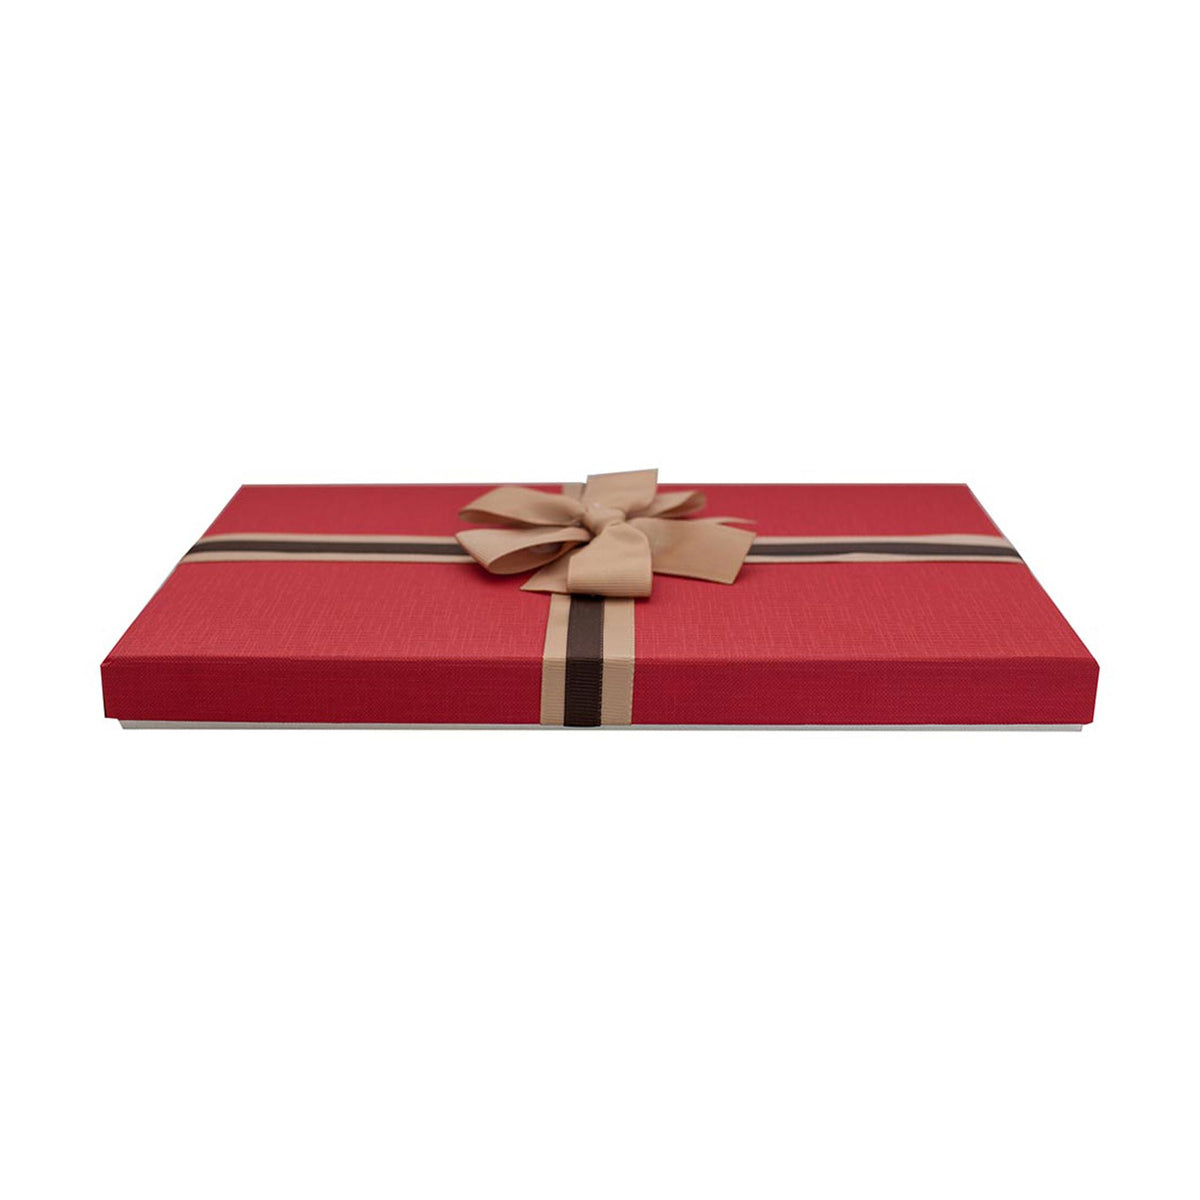 Single Cream/Red Gift Boxes With Brown Satin Ribbon